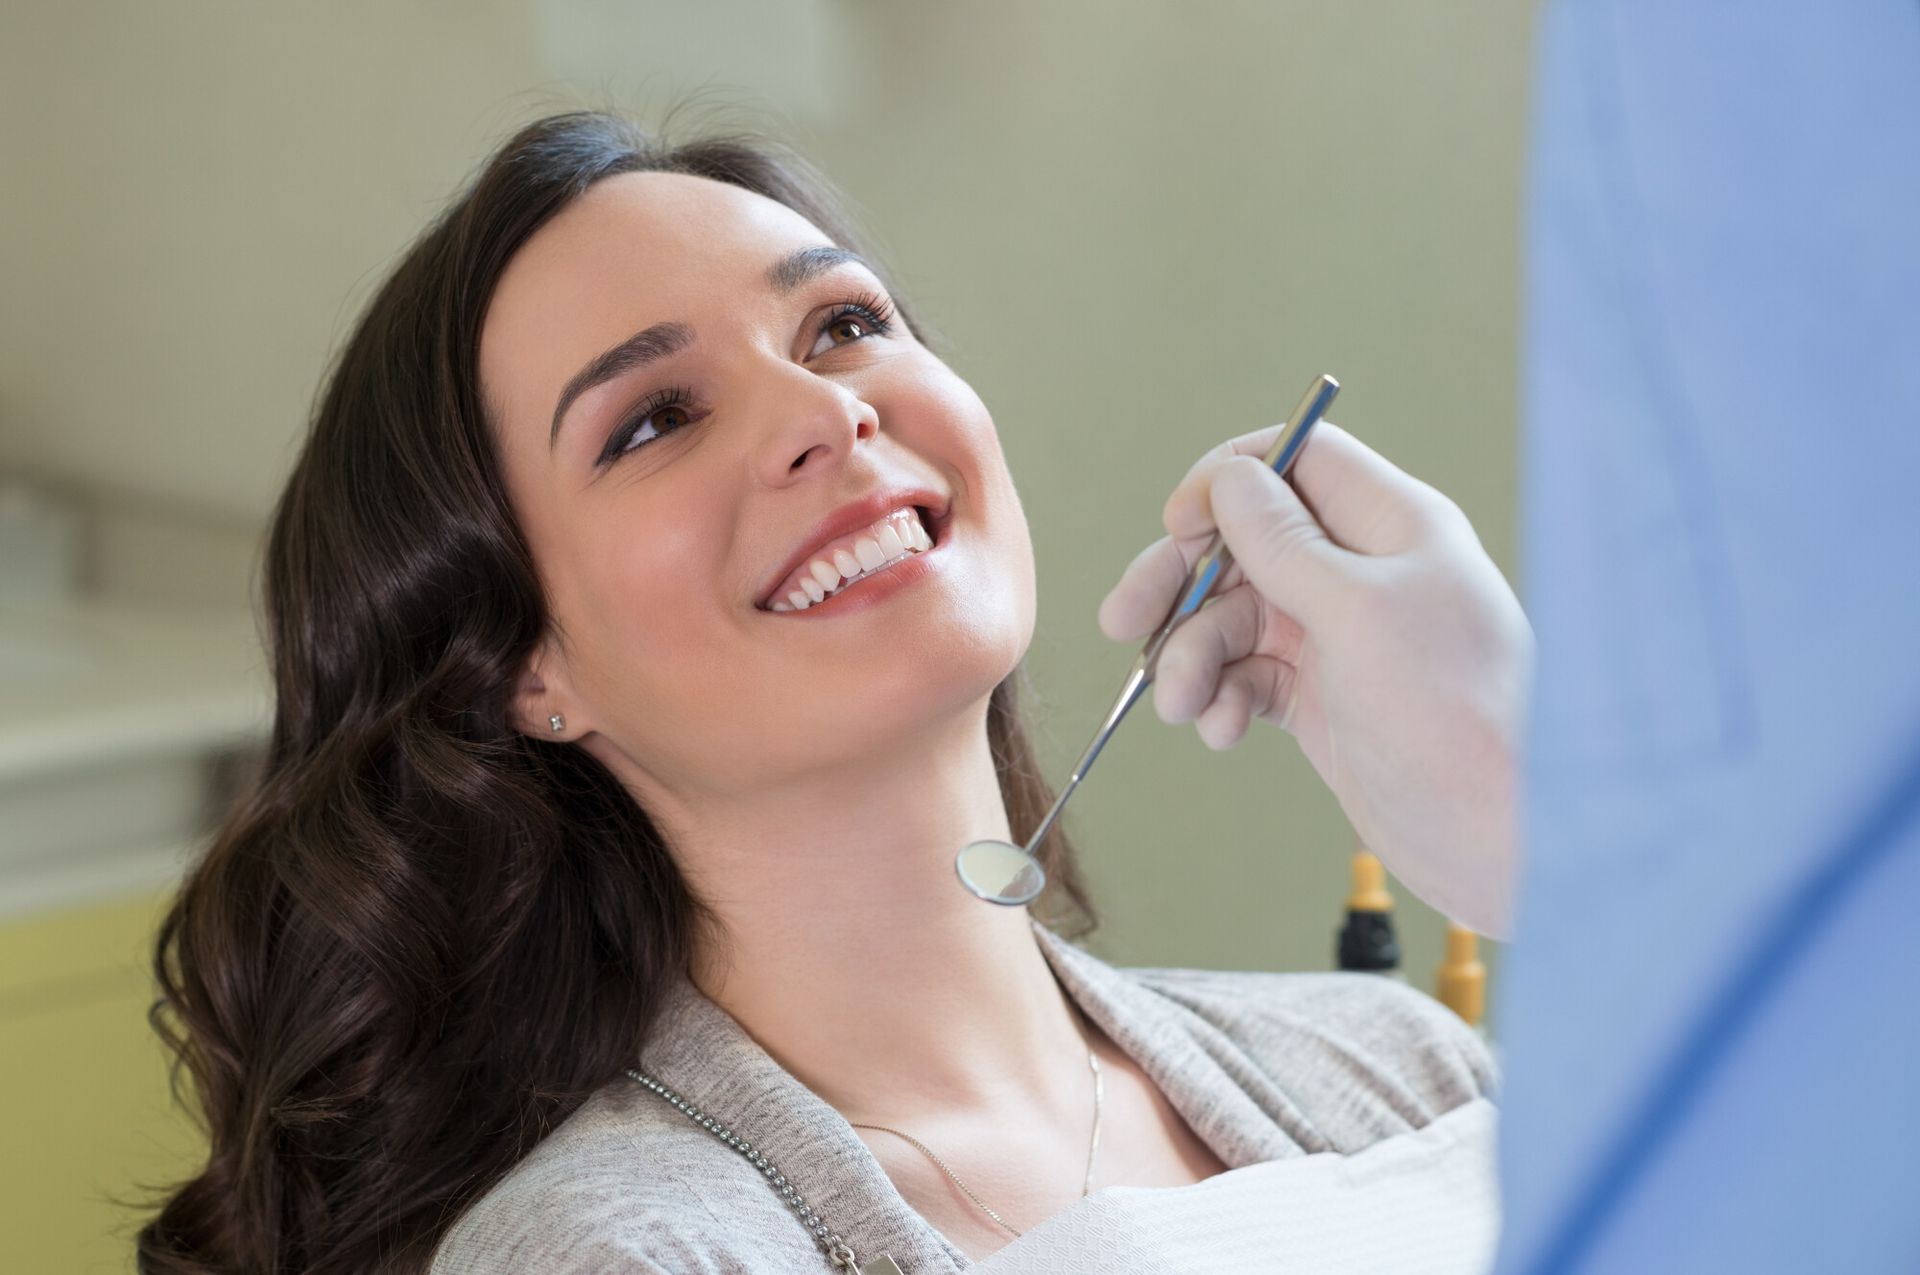 How To Get Help with Dental Implants